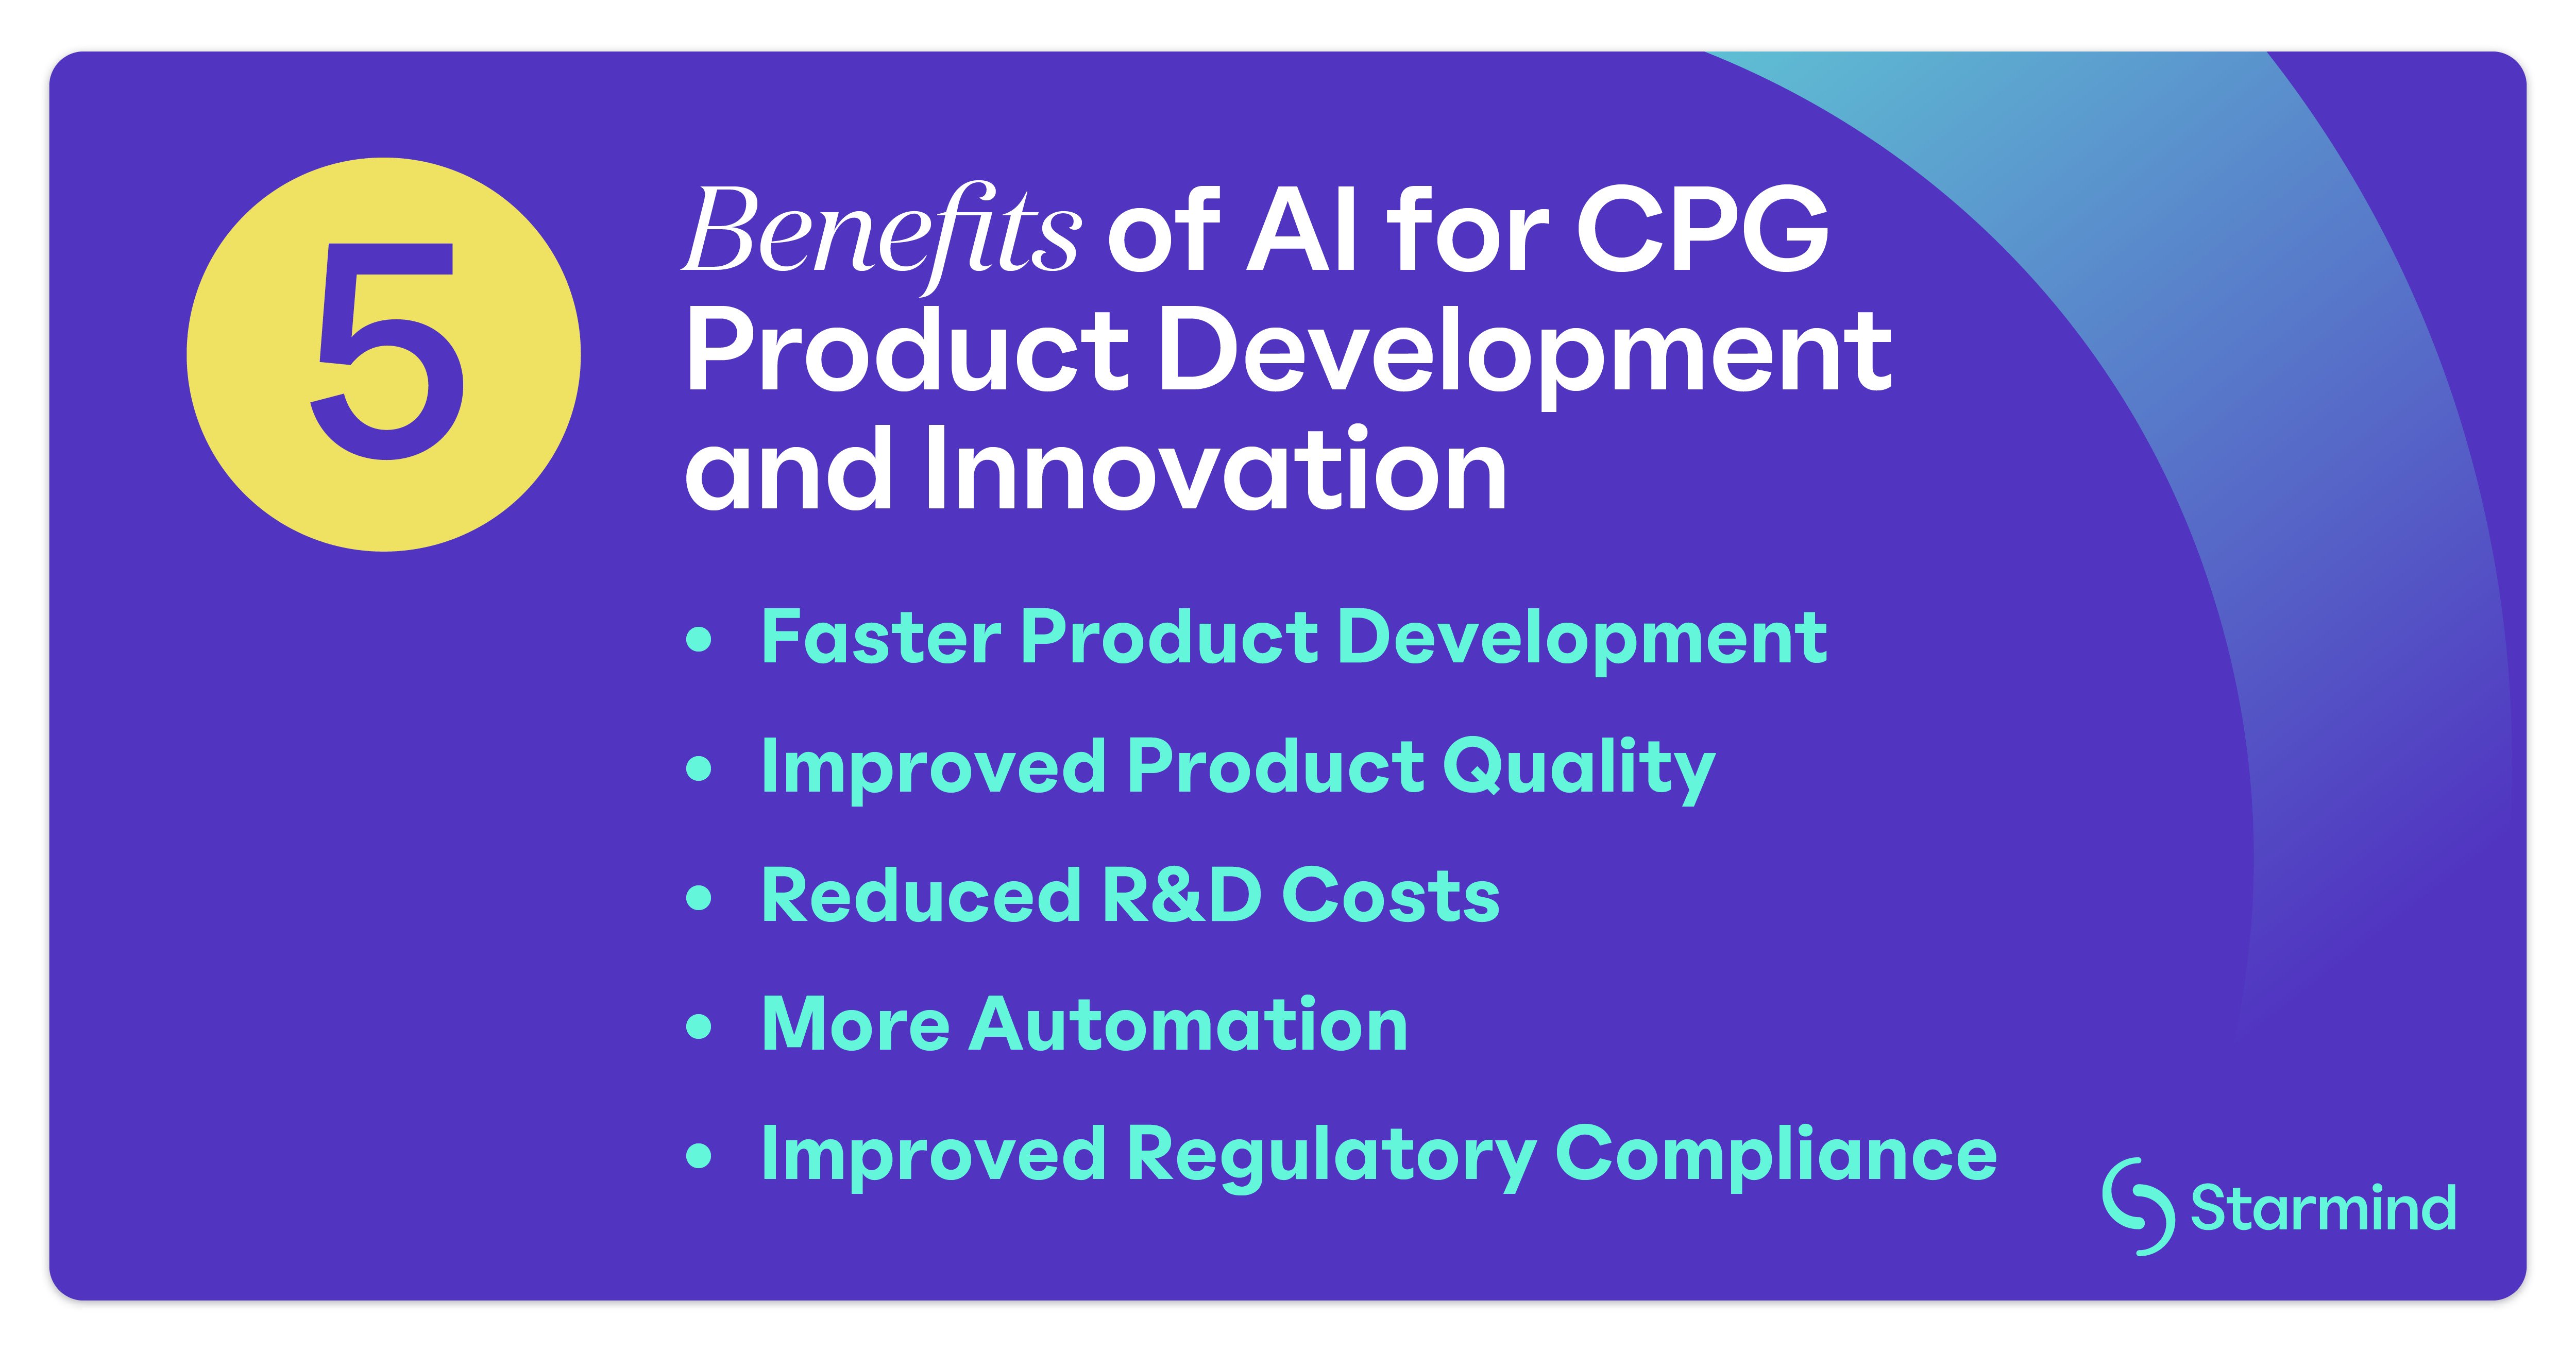 5 Benefits of AI for CPG Product Development and Innovation: Faster product development, Improved product quality, Reduced R&D Costs, More automation, Improved regulatory compliance 